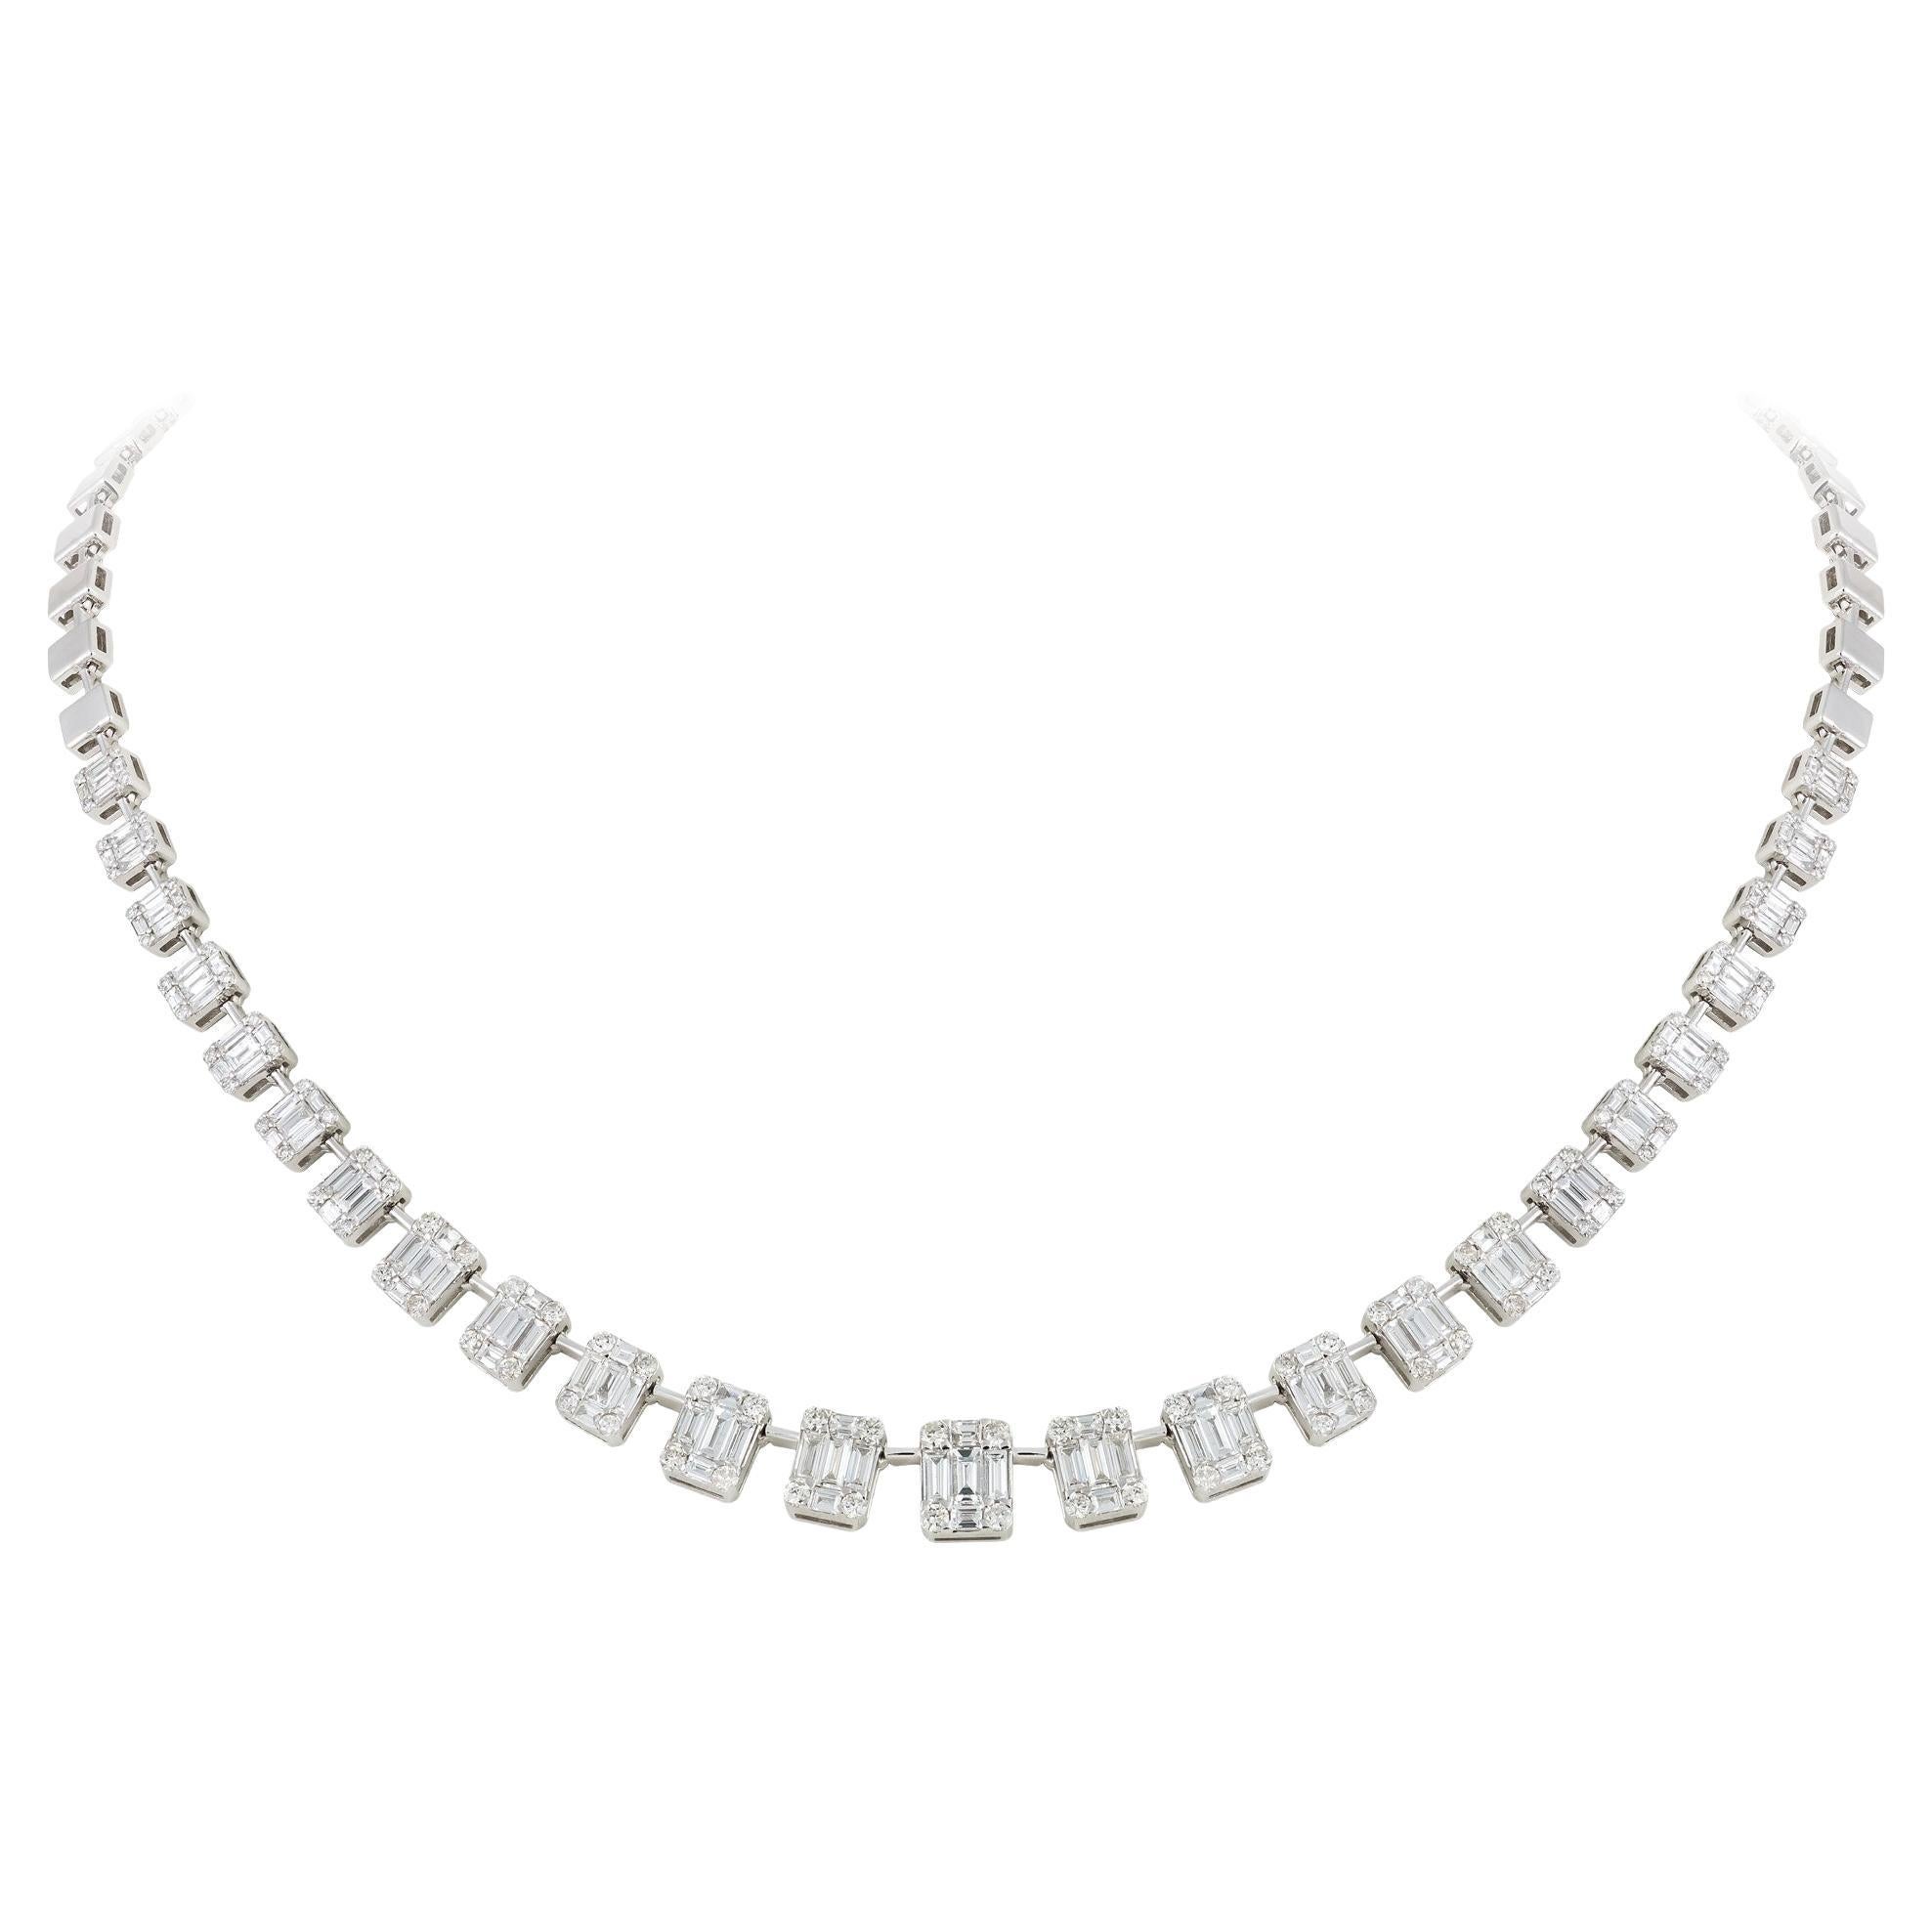 Fashion White Gold 18K Necklace Diamond For Her For Sale